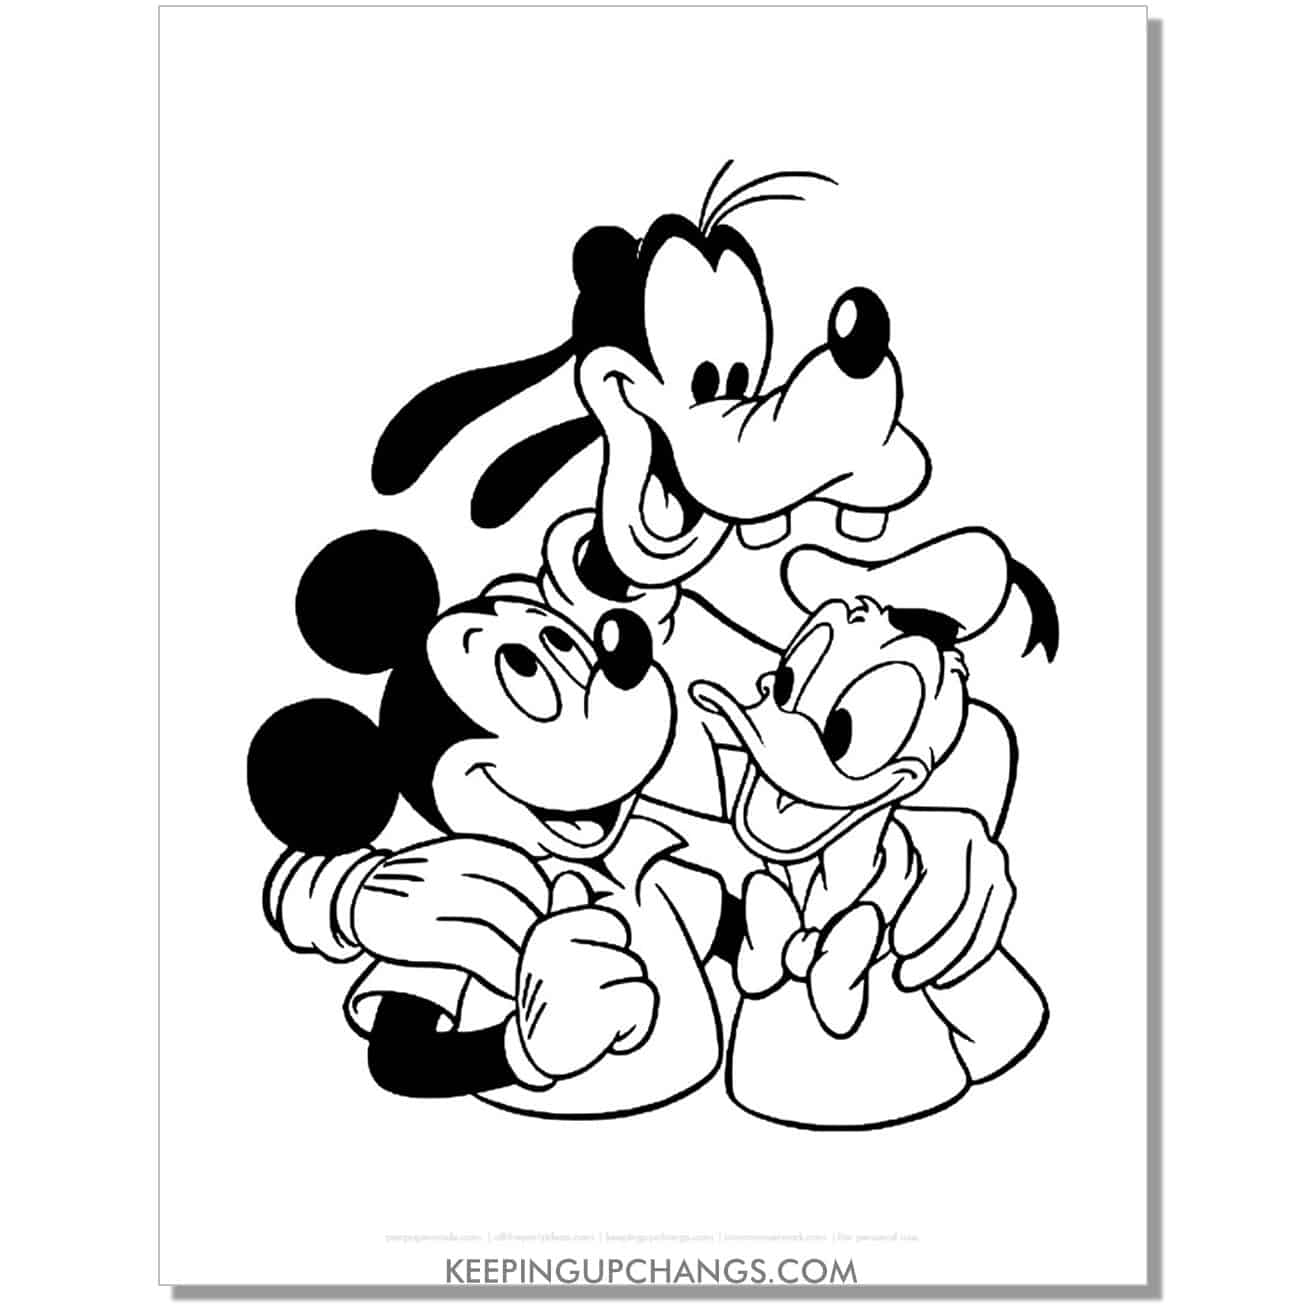 free mickey mouse, goofy, donald duck hug coloring page, sheet.